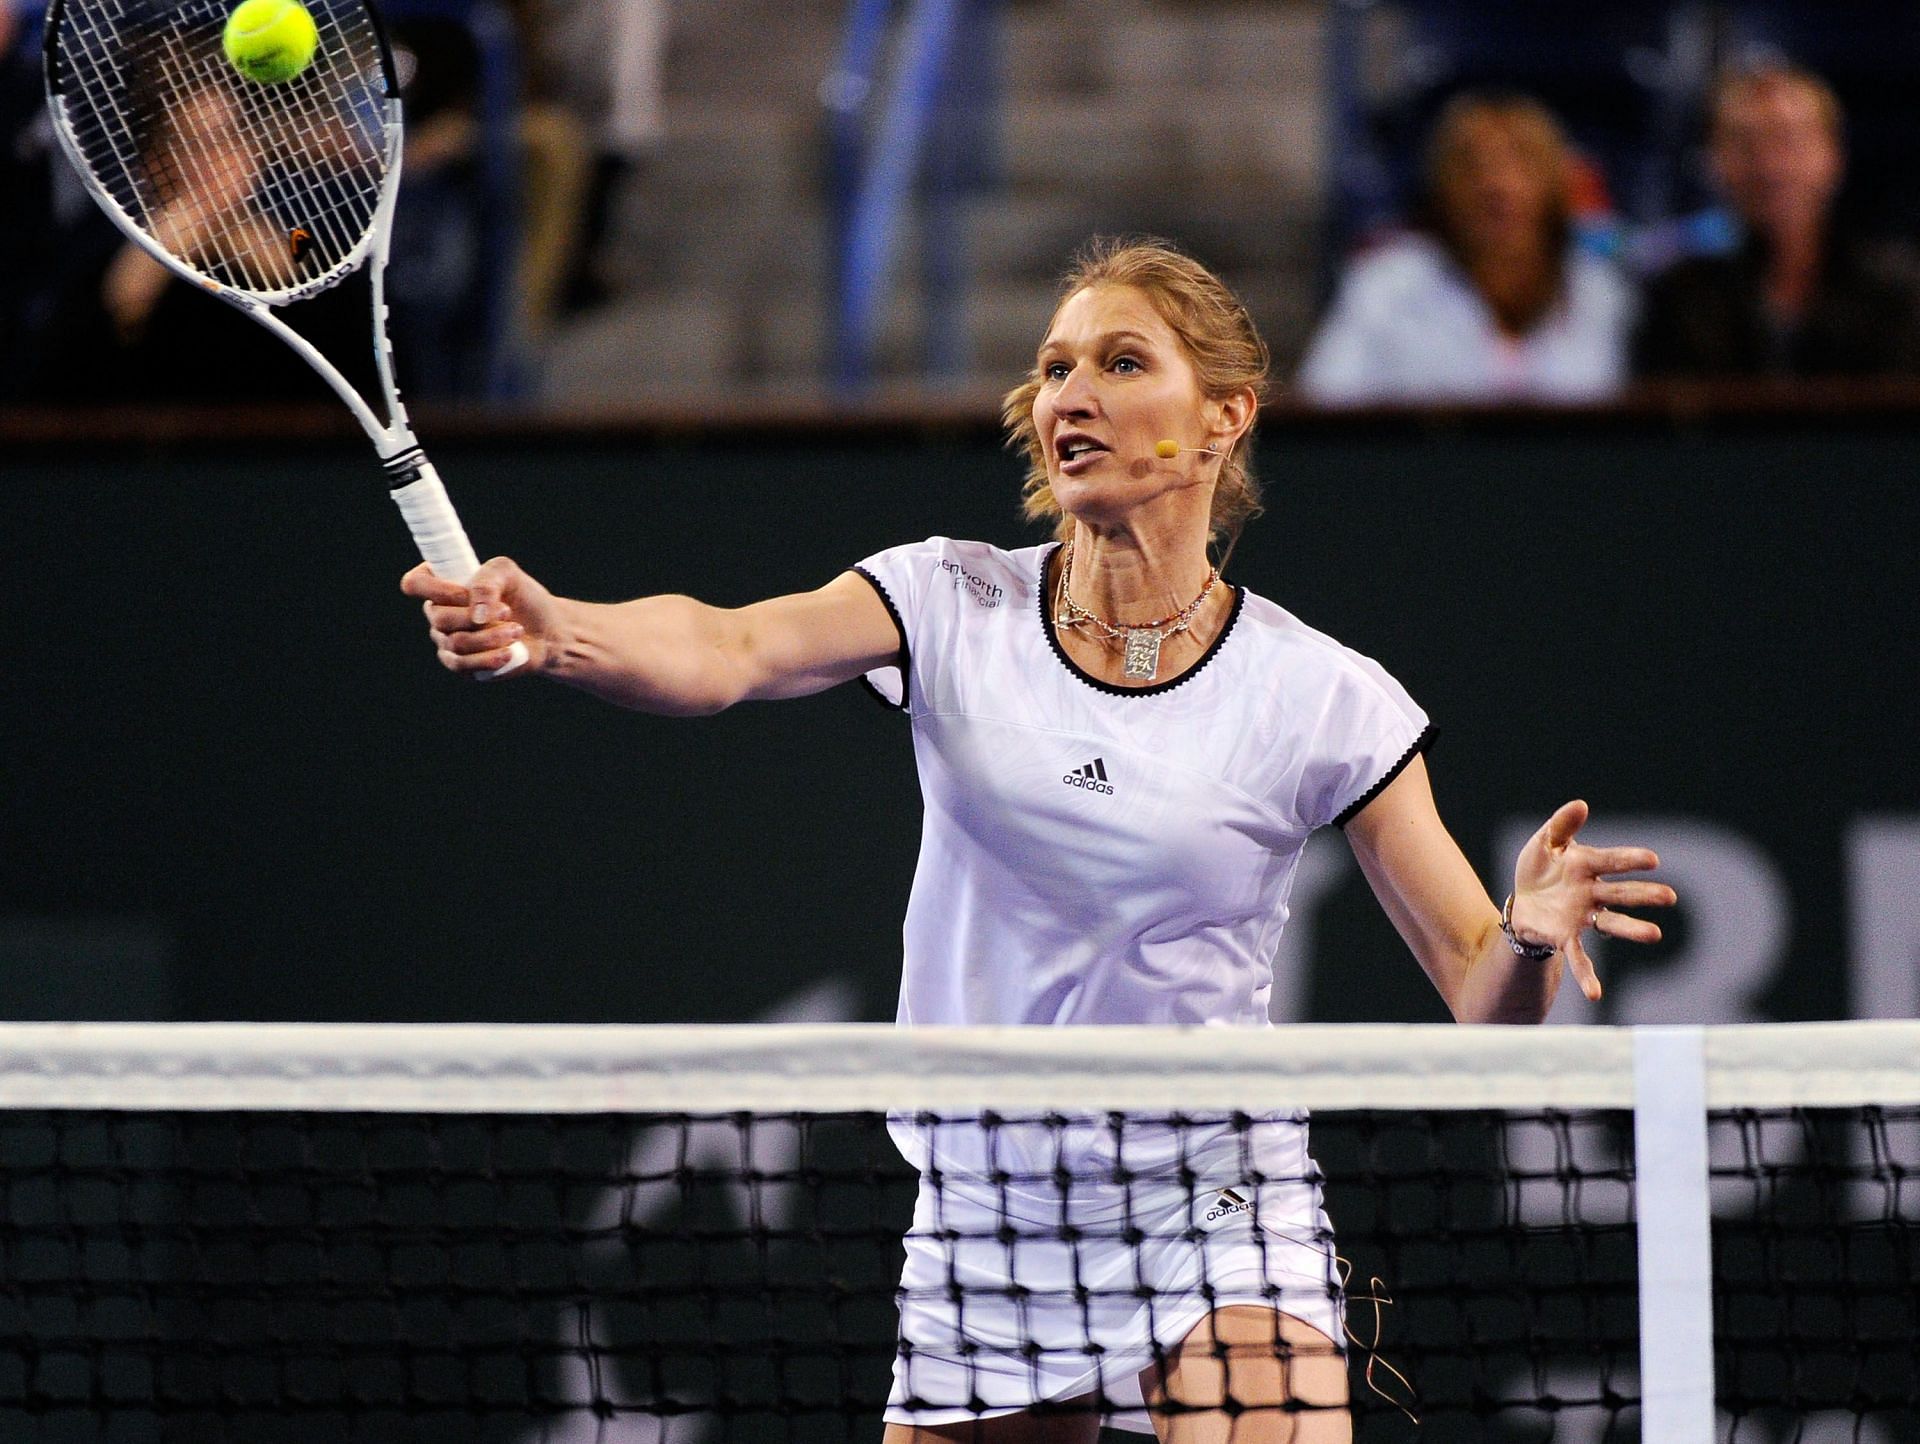 Steffi Graf during a charity event in 2010.